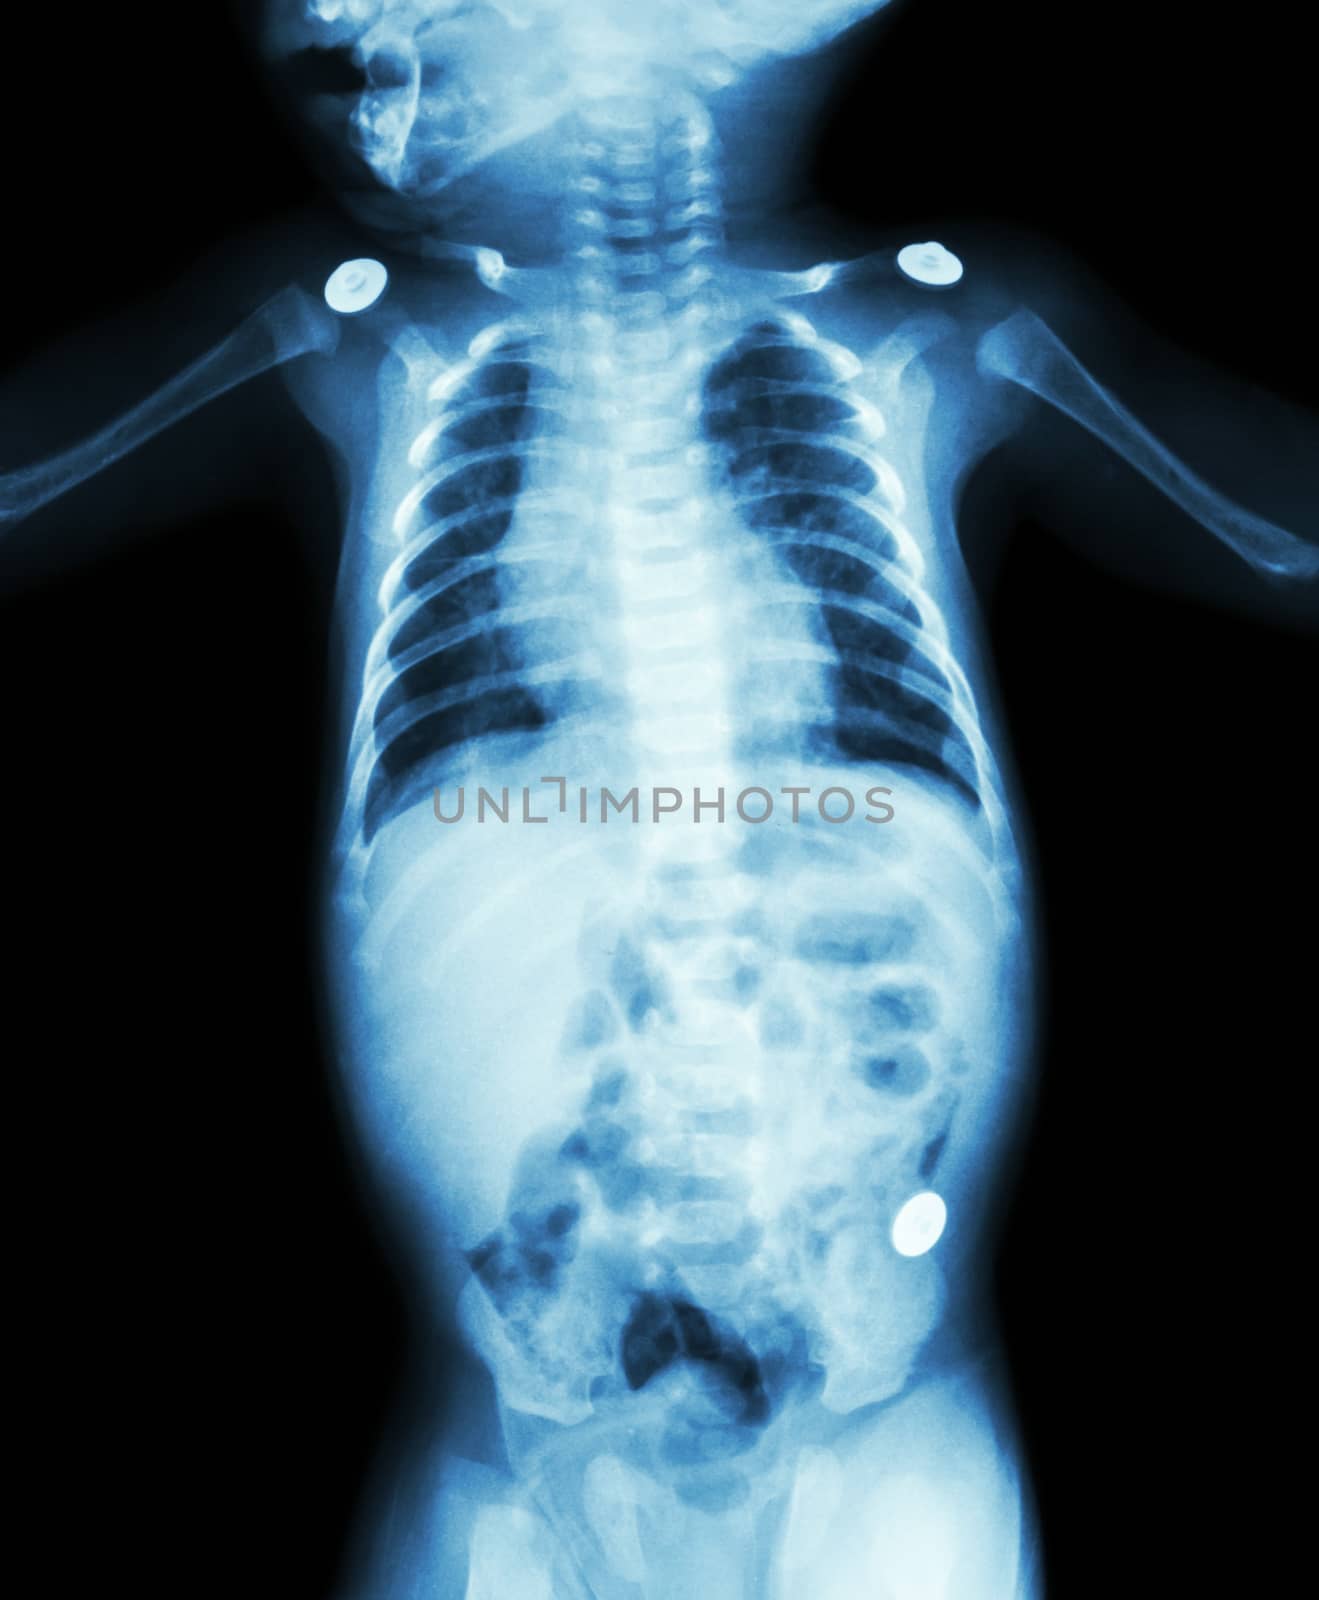 Film X-ray whole body of infant